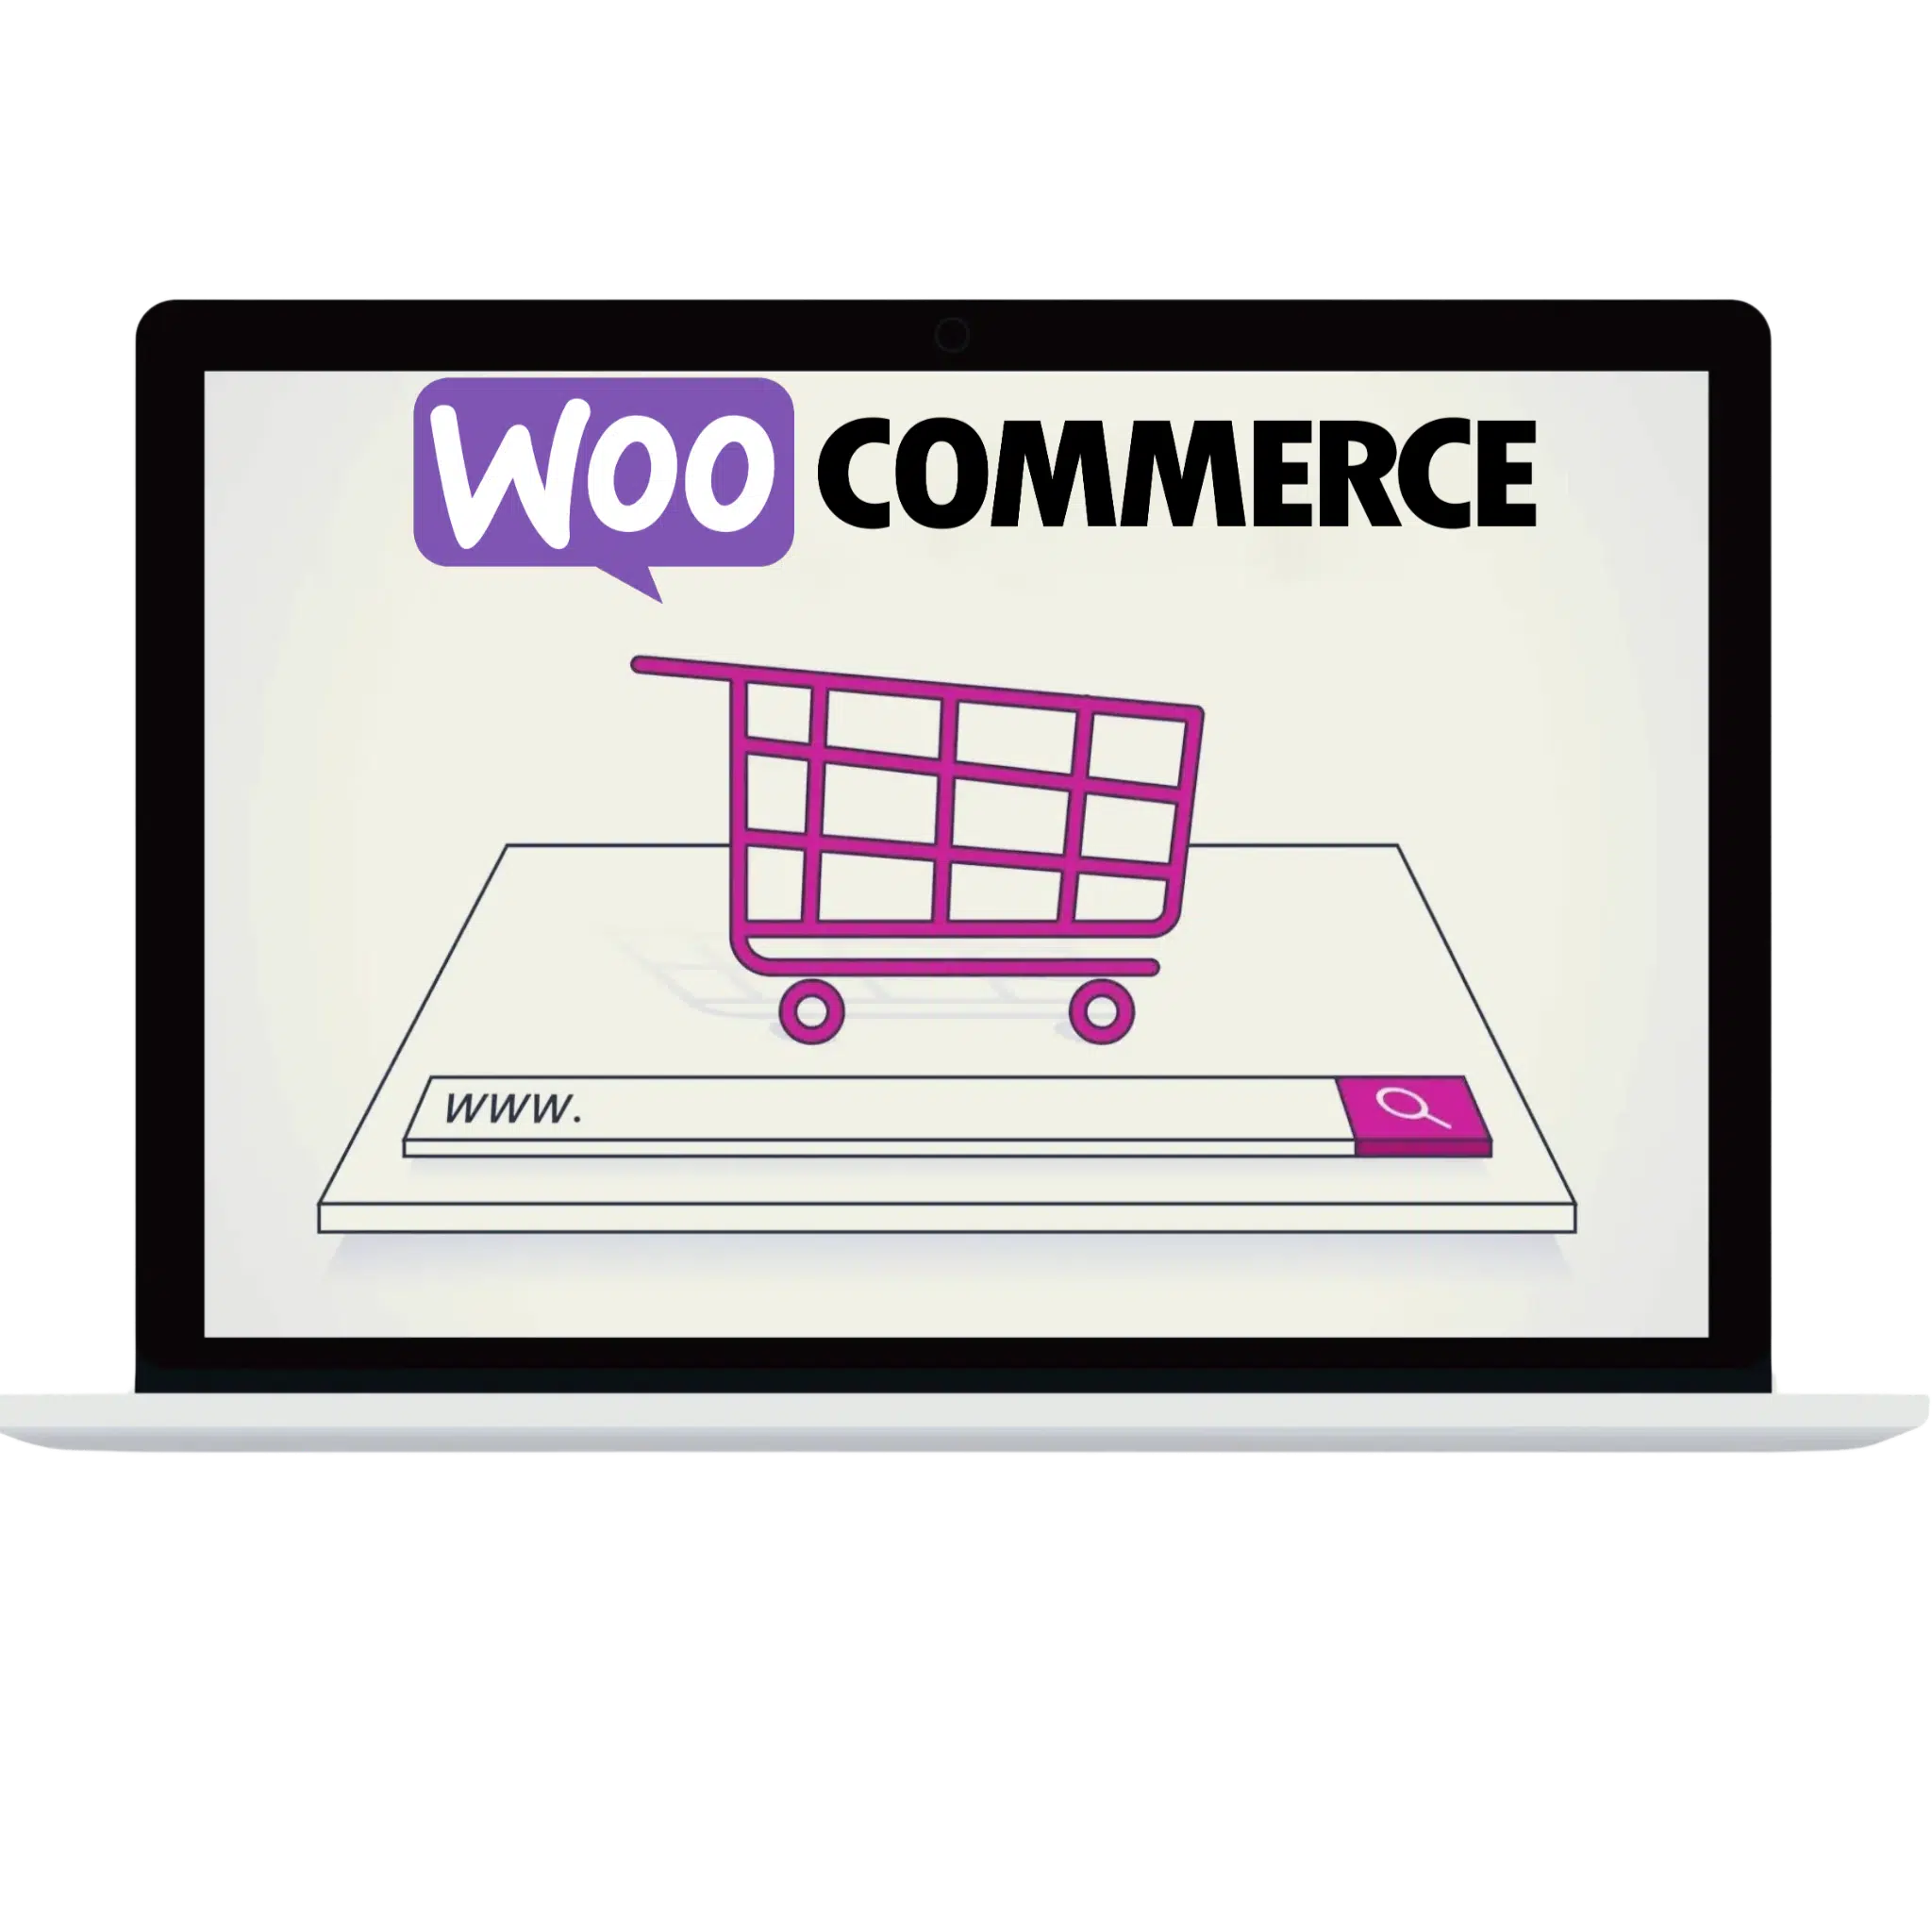 Fast and Reliable WooCommerce Performance: Swift Loading Times for WooCommerce High Performance for WooCommerce Stores Reliable Speed for WooCommerce Hosting Optimal Server Response for WooCommerce Website